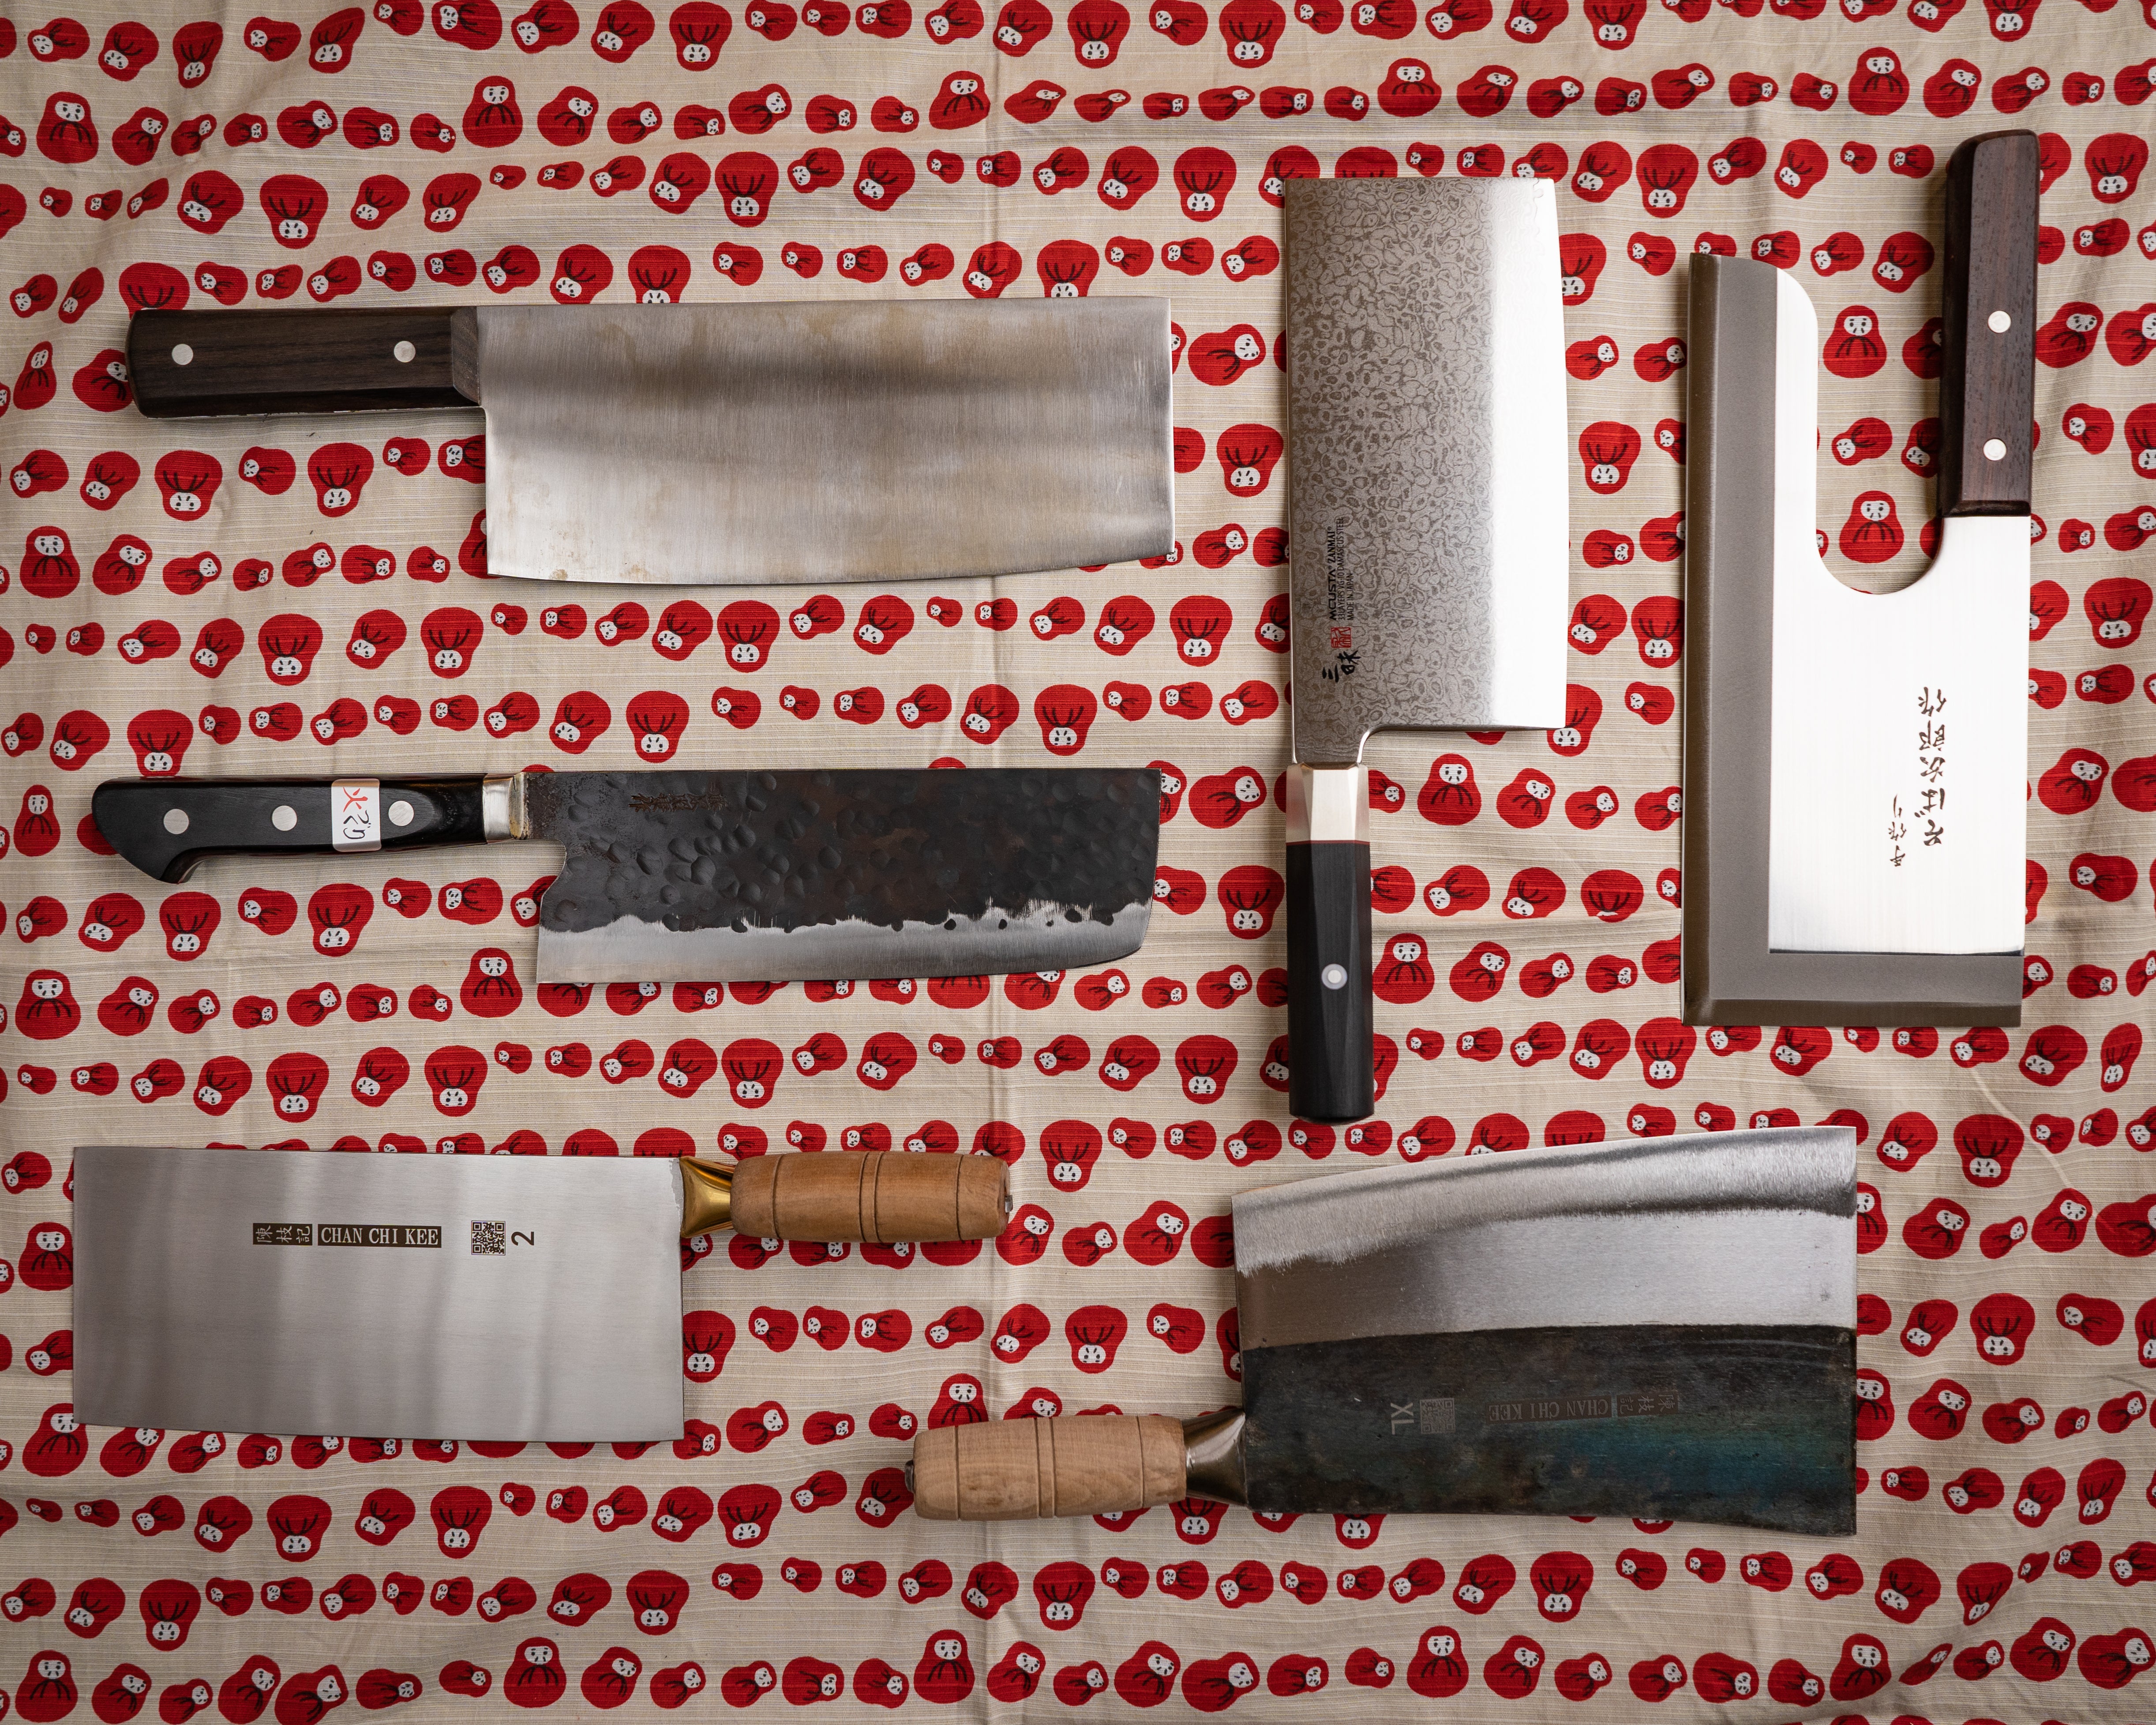 equipment - How heavy should a Chinese chef's knife be? - Seasoned Advice